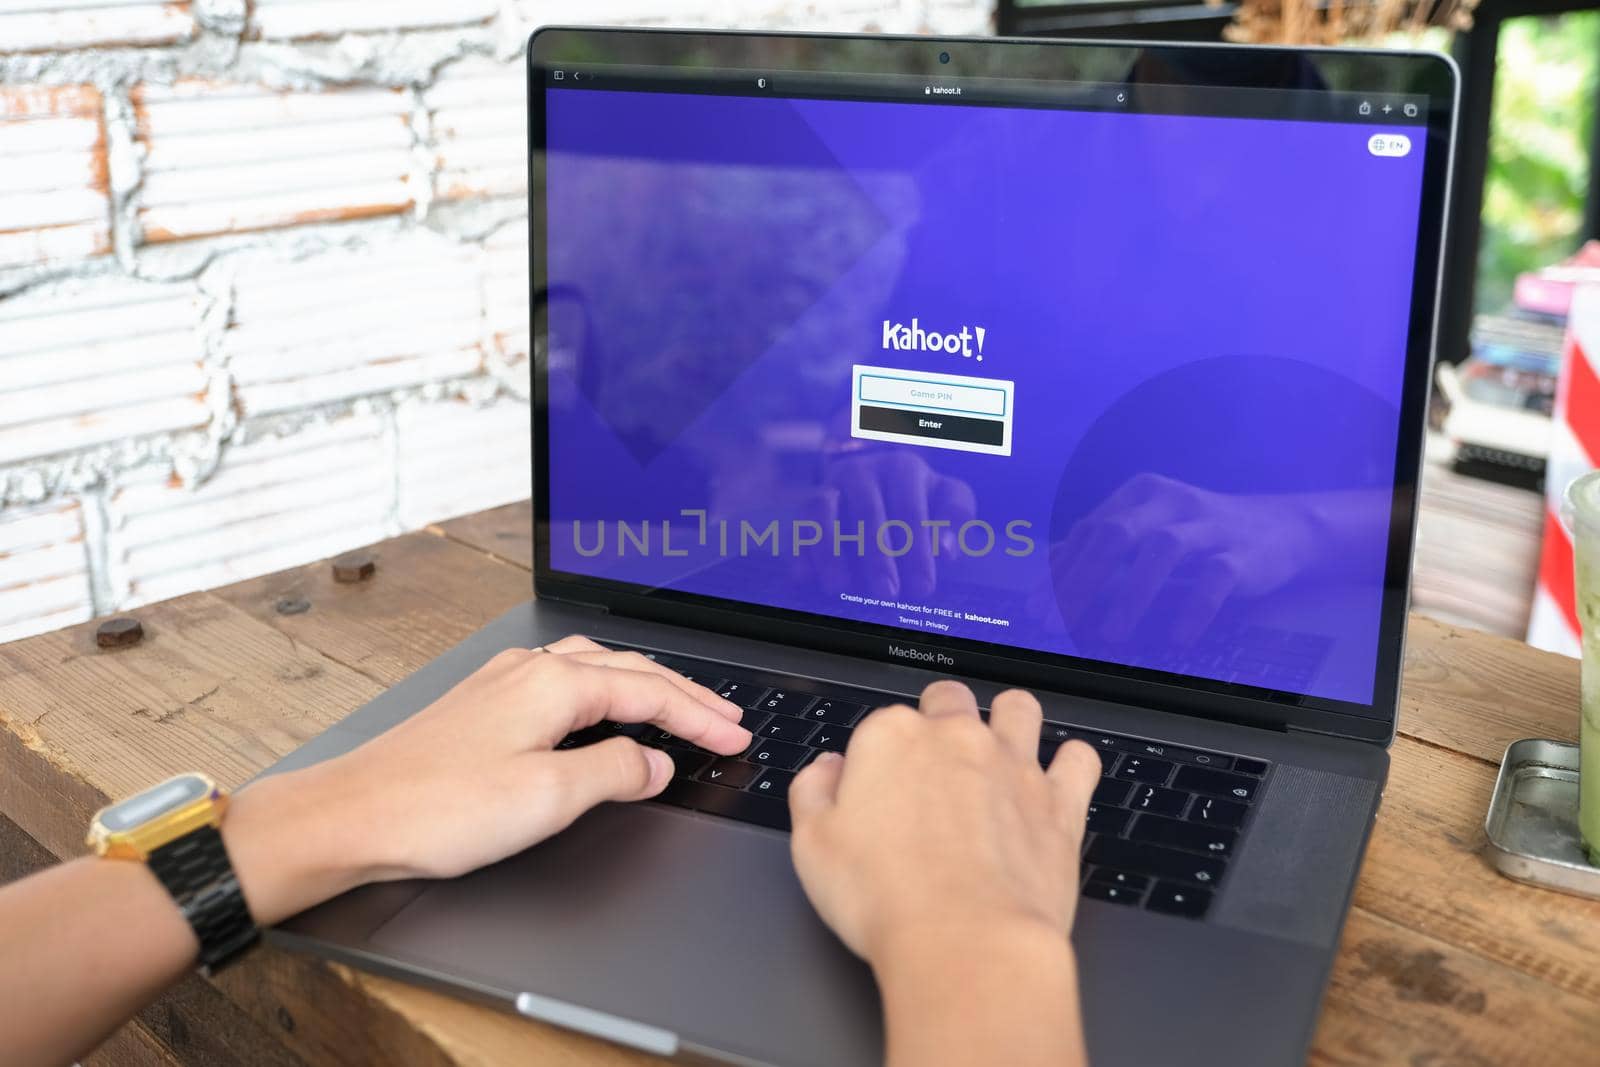 Chiangmai, Thailand - JUNE 06, 2021:person using Laptop computer displaying logo of Kahoot, a game-based learning platform. by Manastrong